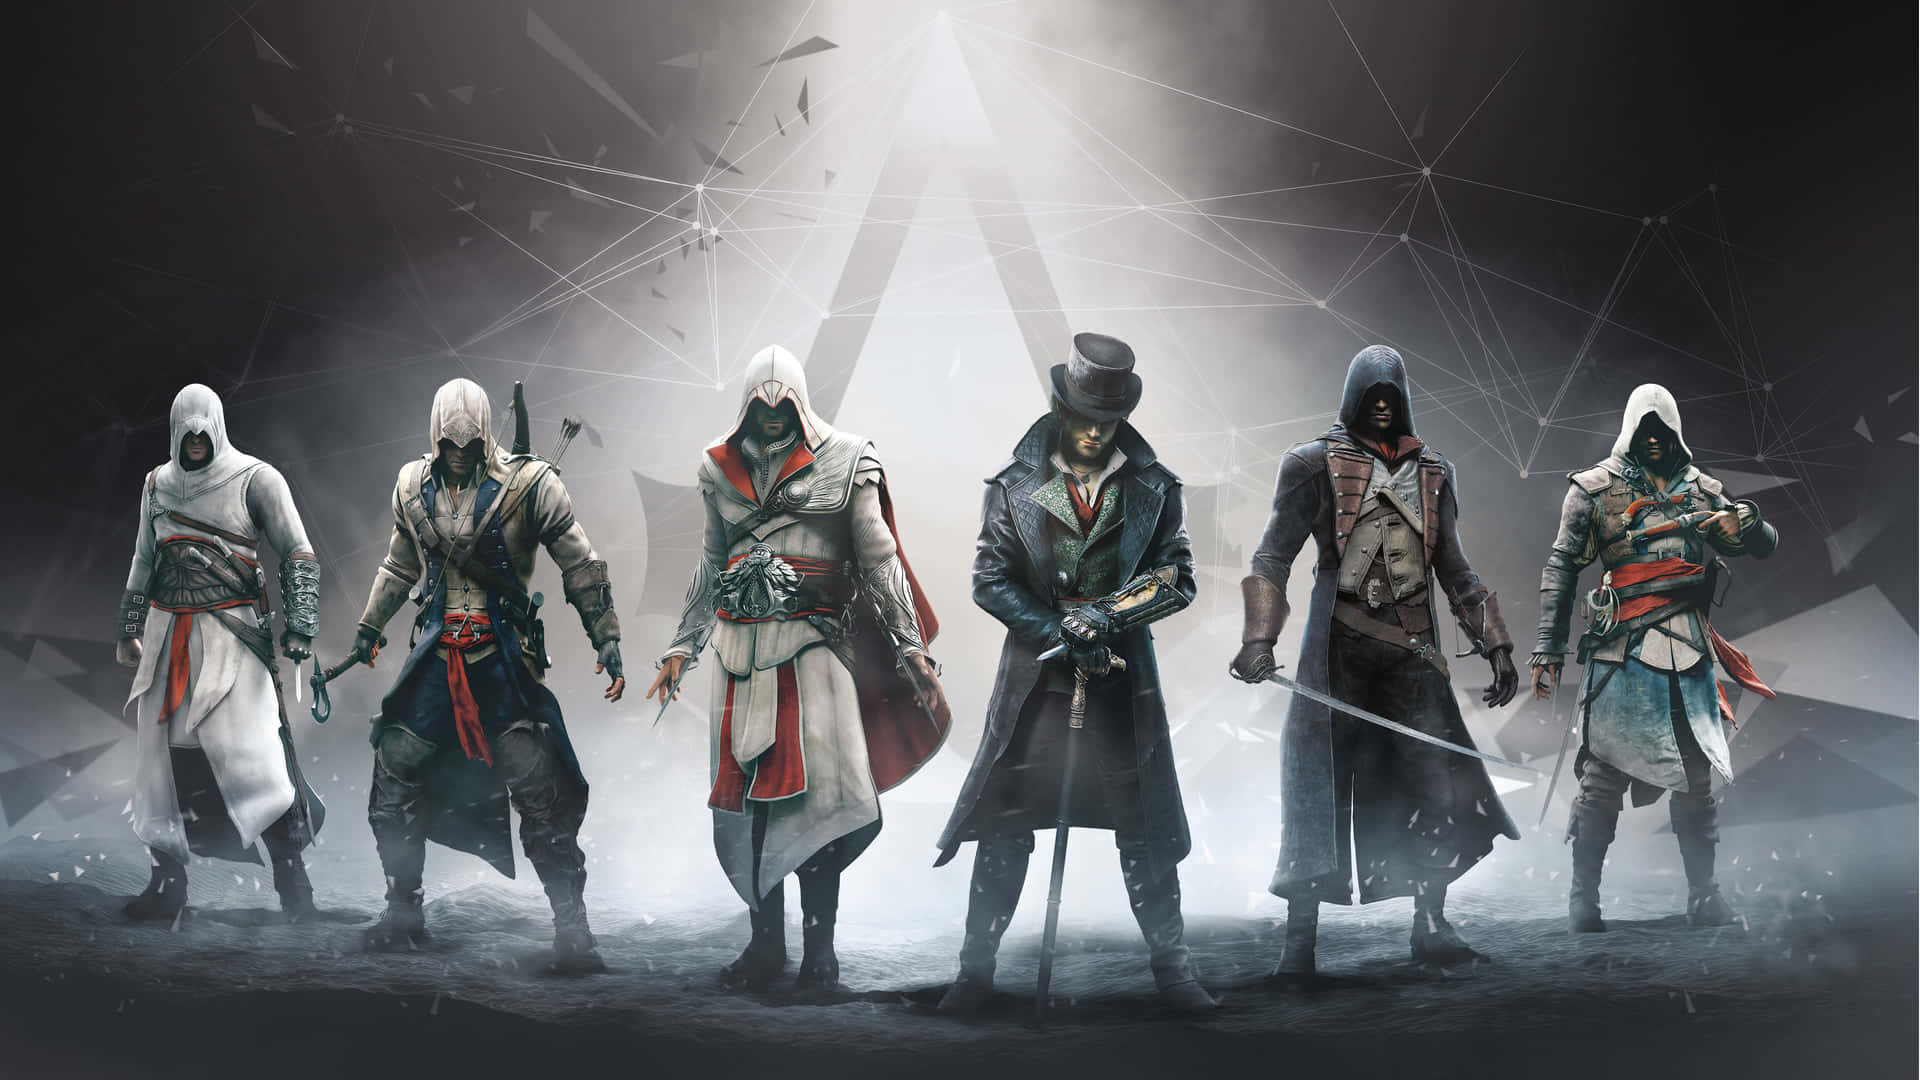 Assassin's Creed Characters in Action Wallpaper